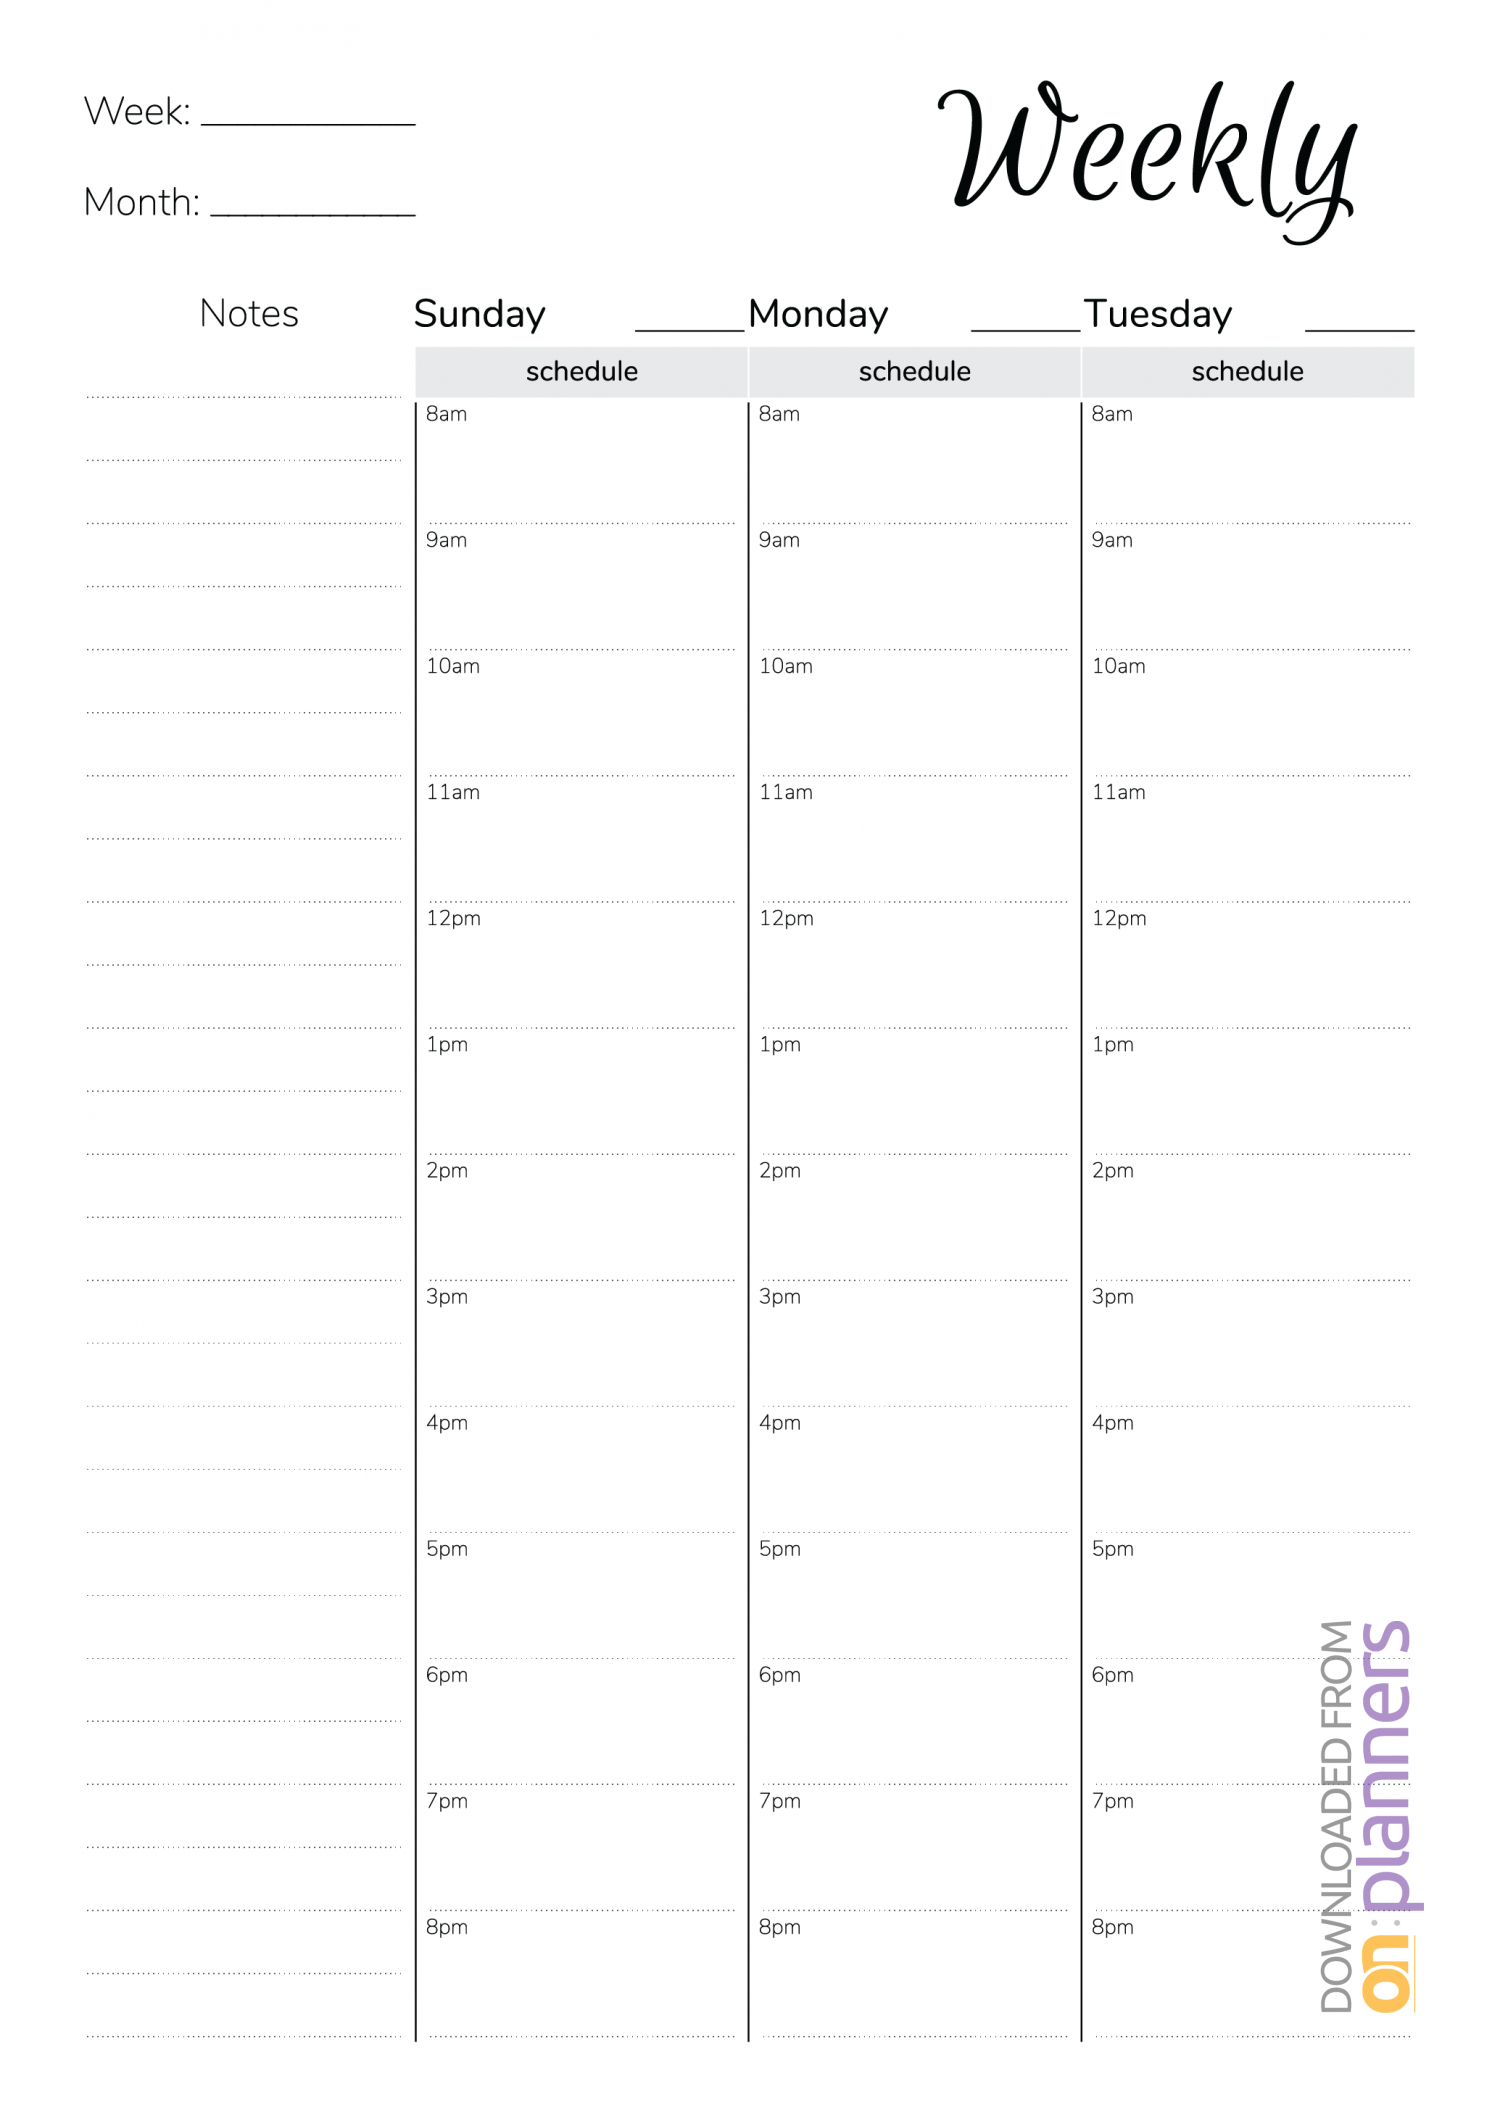 020 Template Ideas Weekly Hourly Schedule Printable Planner in Printable Weekly Hourly Schedule